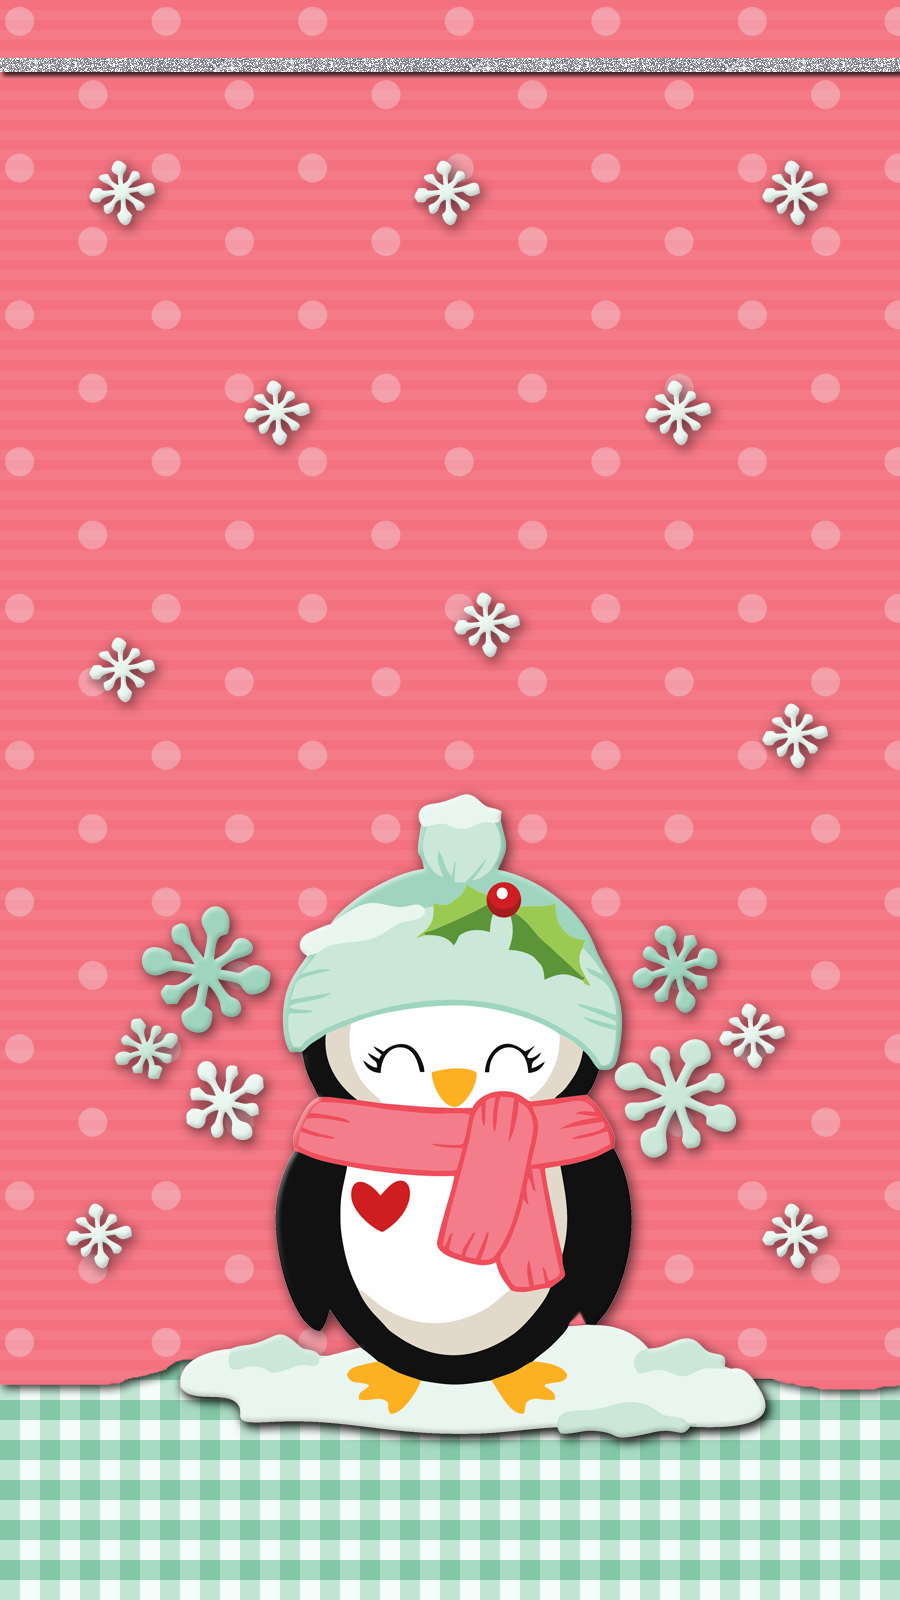 Winter Penguin Wallpaper Iphone Android Cute Wallpaper Iphone Christmas Christmas Phone Wallpaper Cute Christmas Wallpaper